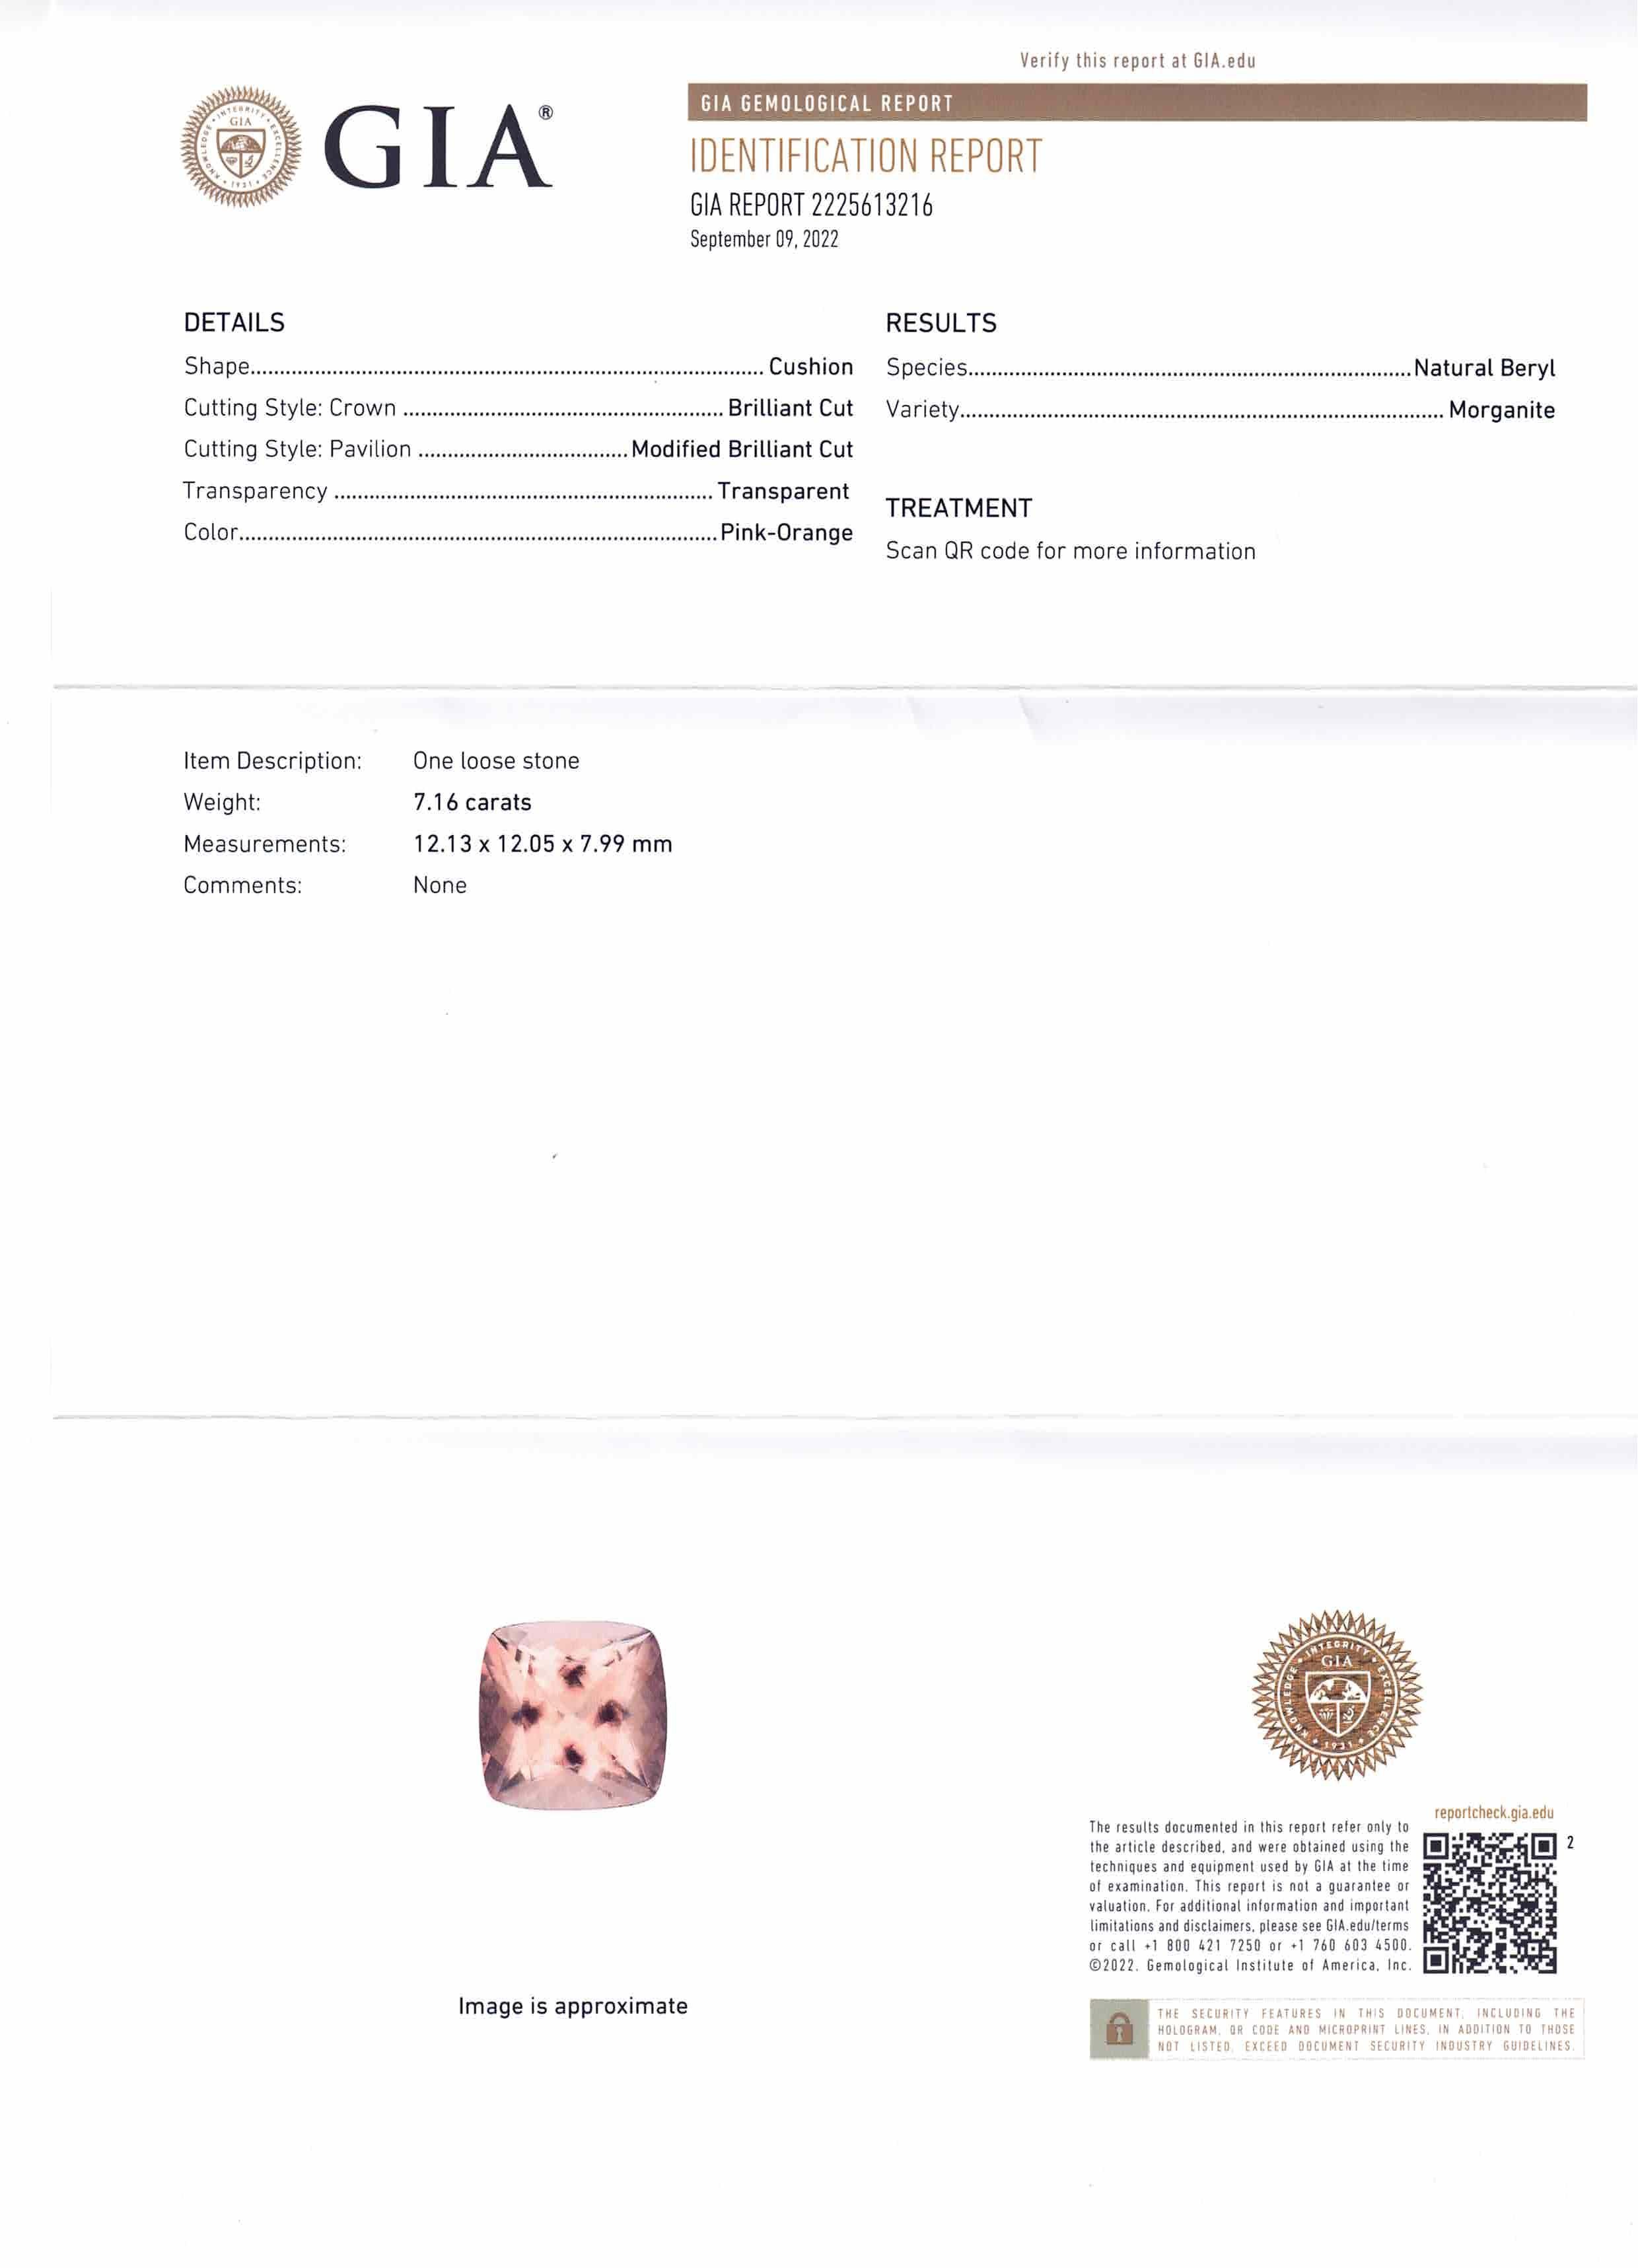 This is a stunning GIA Certified Morganite

 

The GIA report reads as follows:

GIA Report Number: 2225613216
Shape: Cushion
Cutting Style:
Cutting Style: Crown: Brilliant Cut
Cutting Style: Pavilion: Modified Brilliant Cut
Transparency: